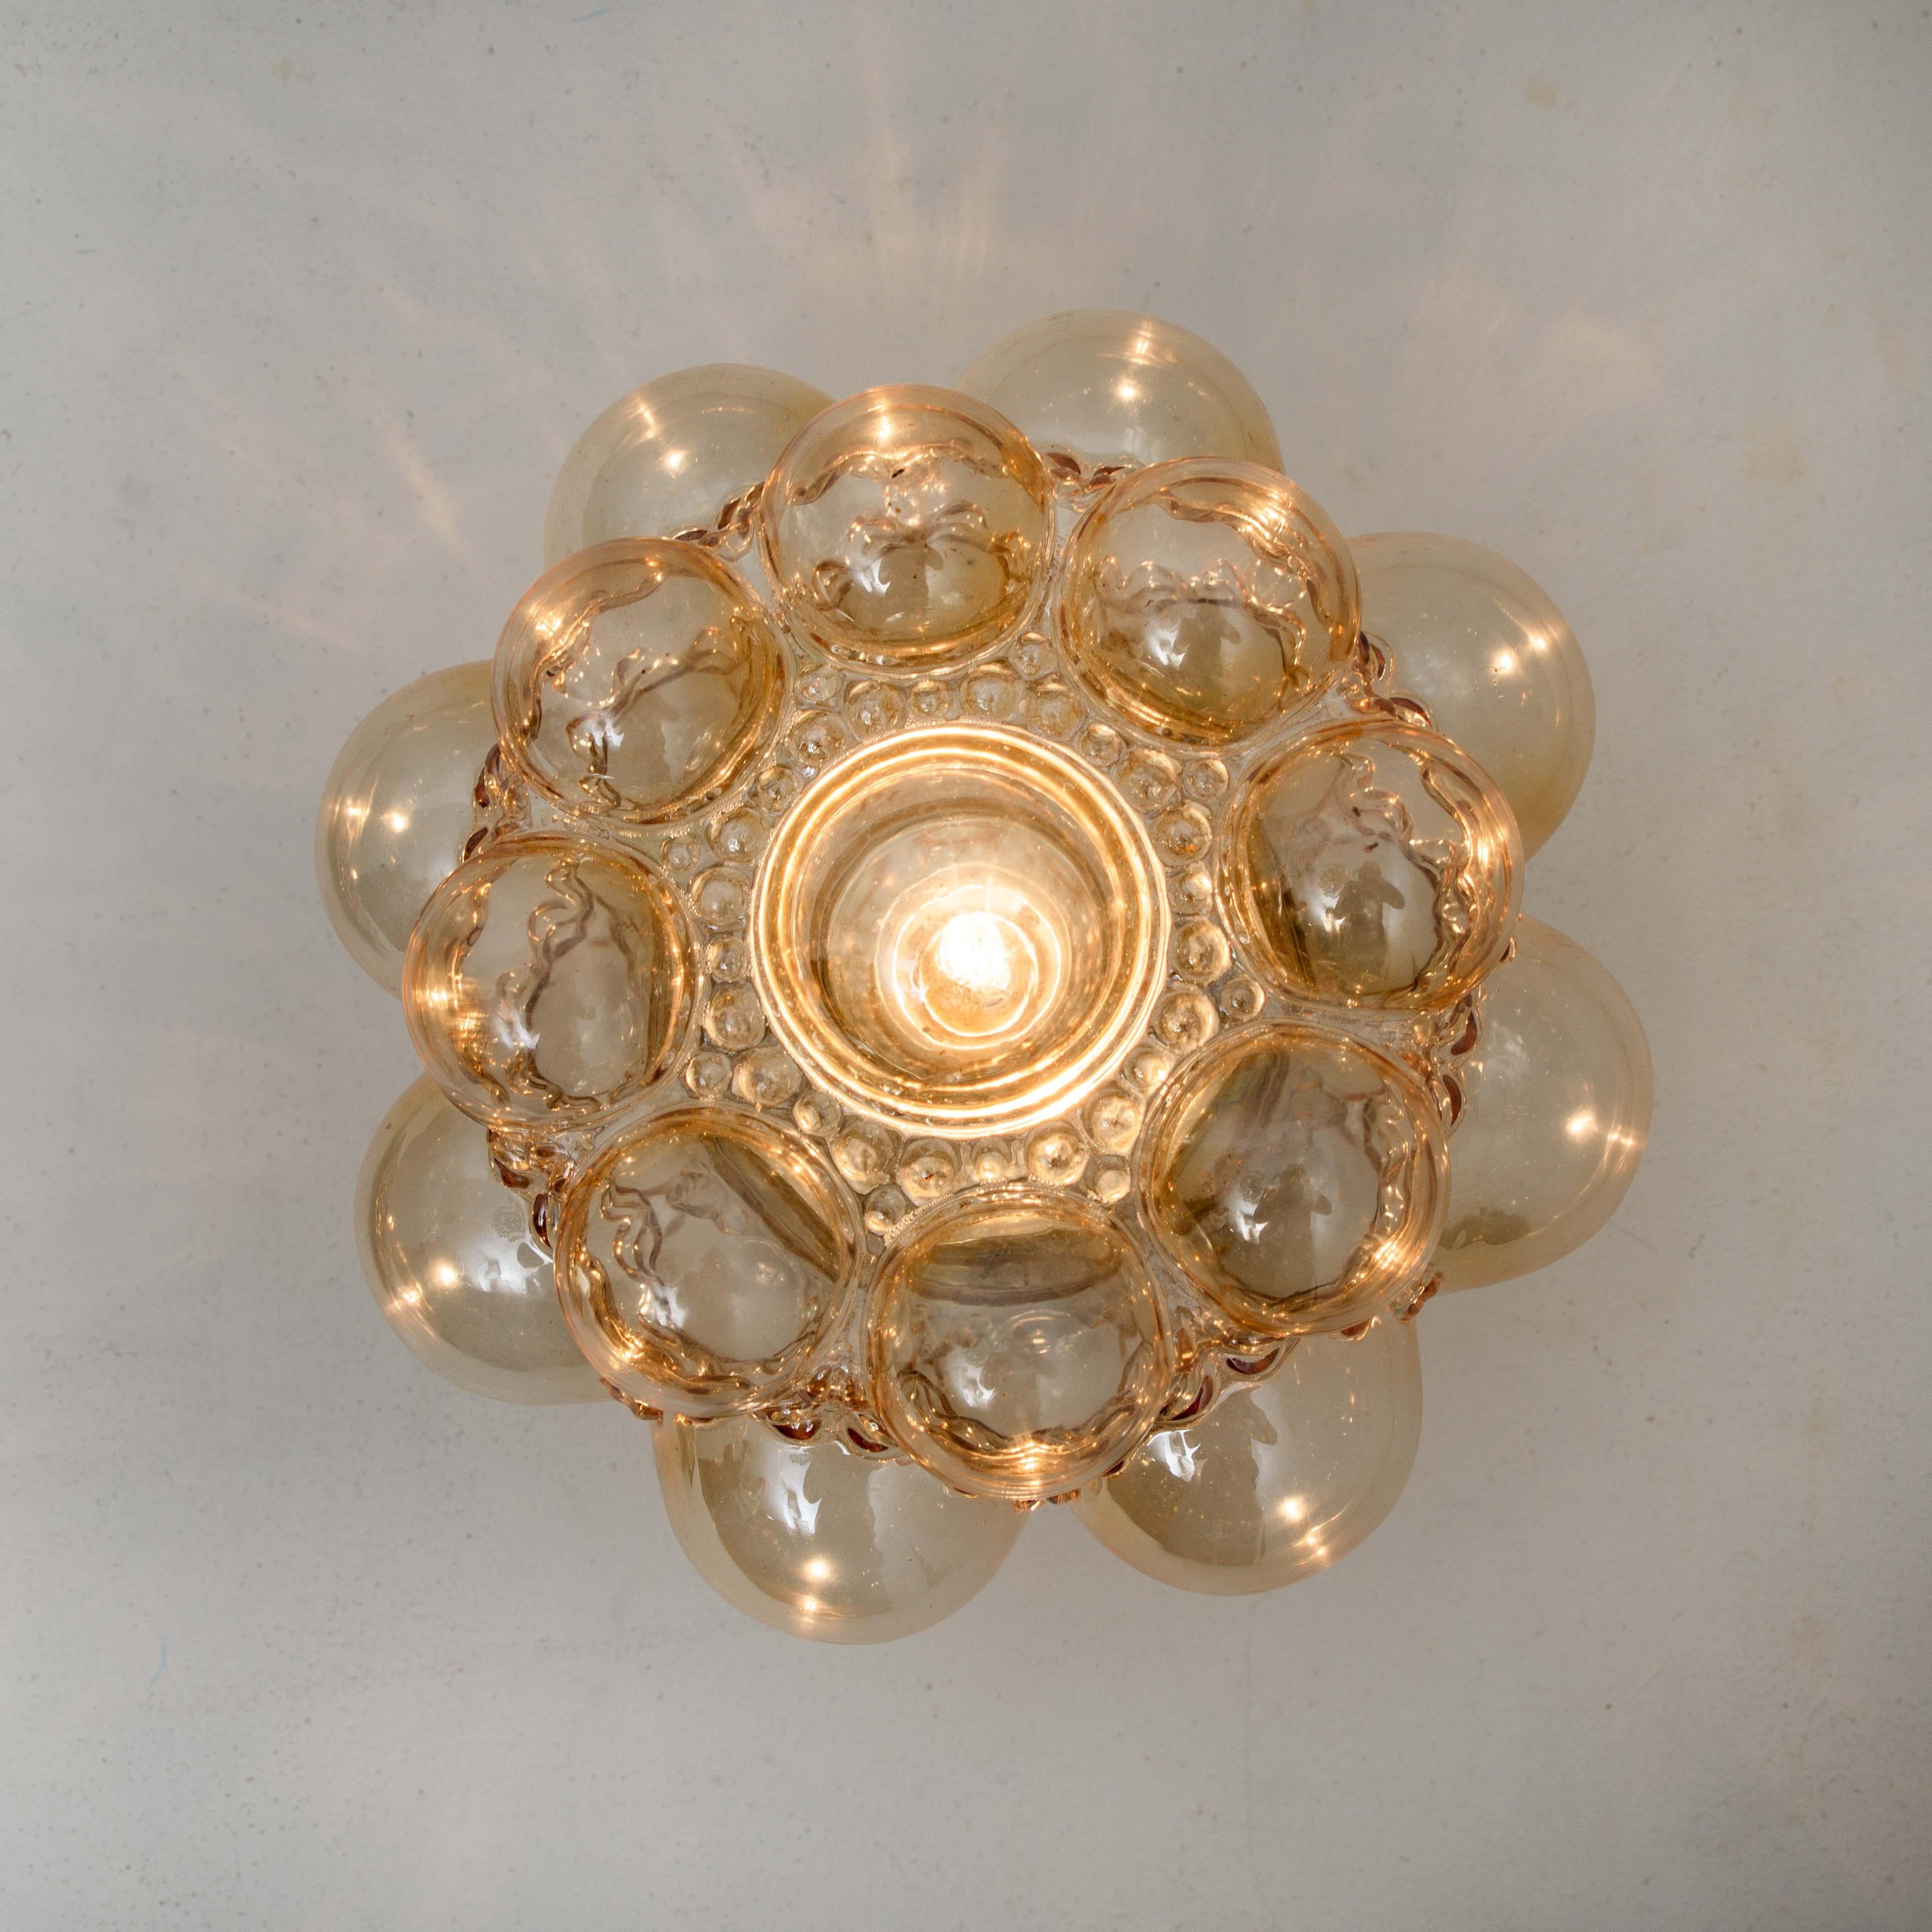 Beautiful high-end large bubble wall lights or flush mounts by Helena Tynell for Glashütte Limburg, Germany, 1960s.
Made of glossy amber colored glass with a brass colored base. A design Classic, the hand blown amber toned glass gives a wonderful